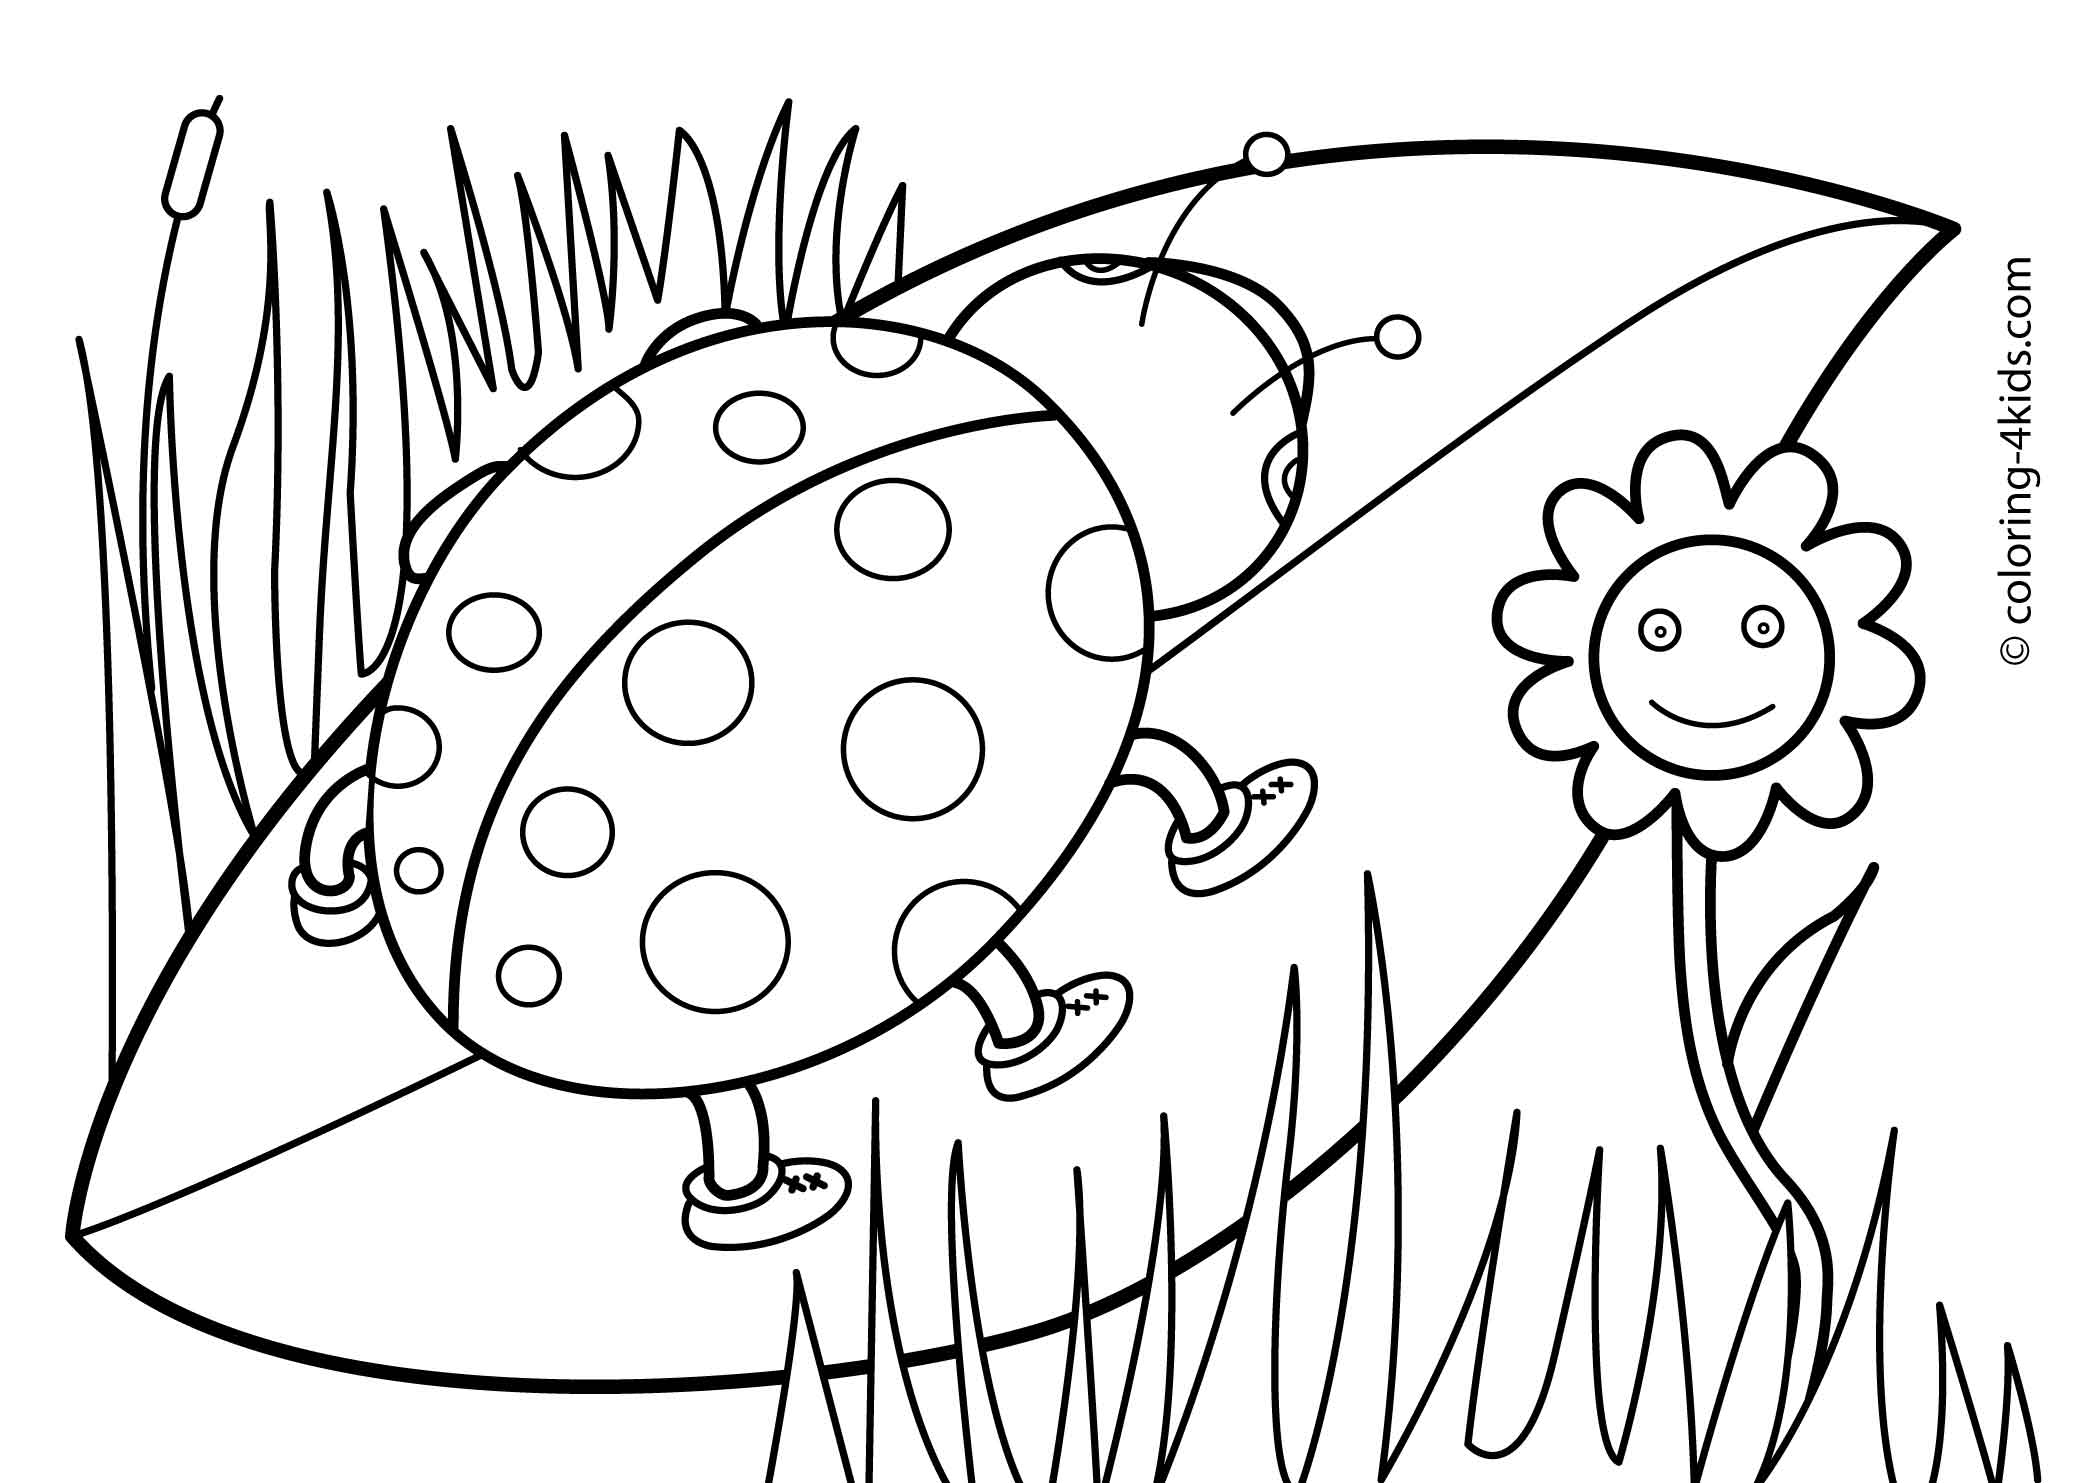 colouring page for preschool - Clip Art Library